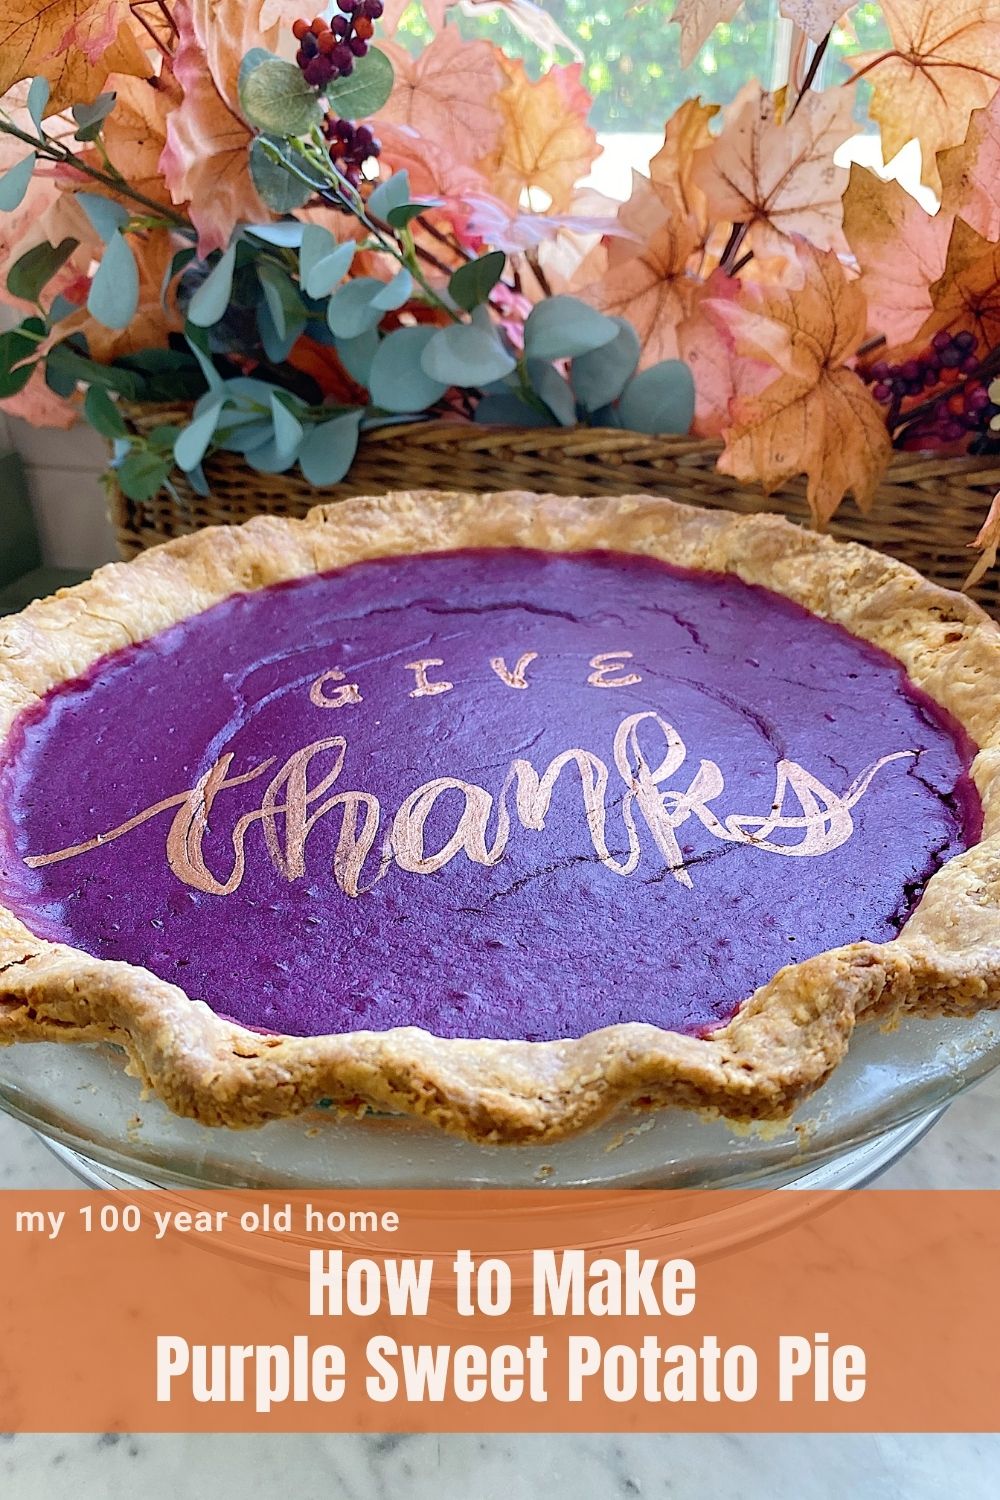 I am so excited to share this Amazing Purple Sweet Potato Pie recipe. My friend chef Monique Chan was back and we cooked this amazing Thanksgiving recipe.